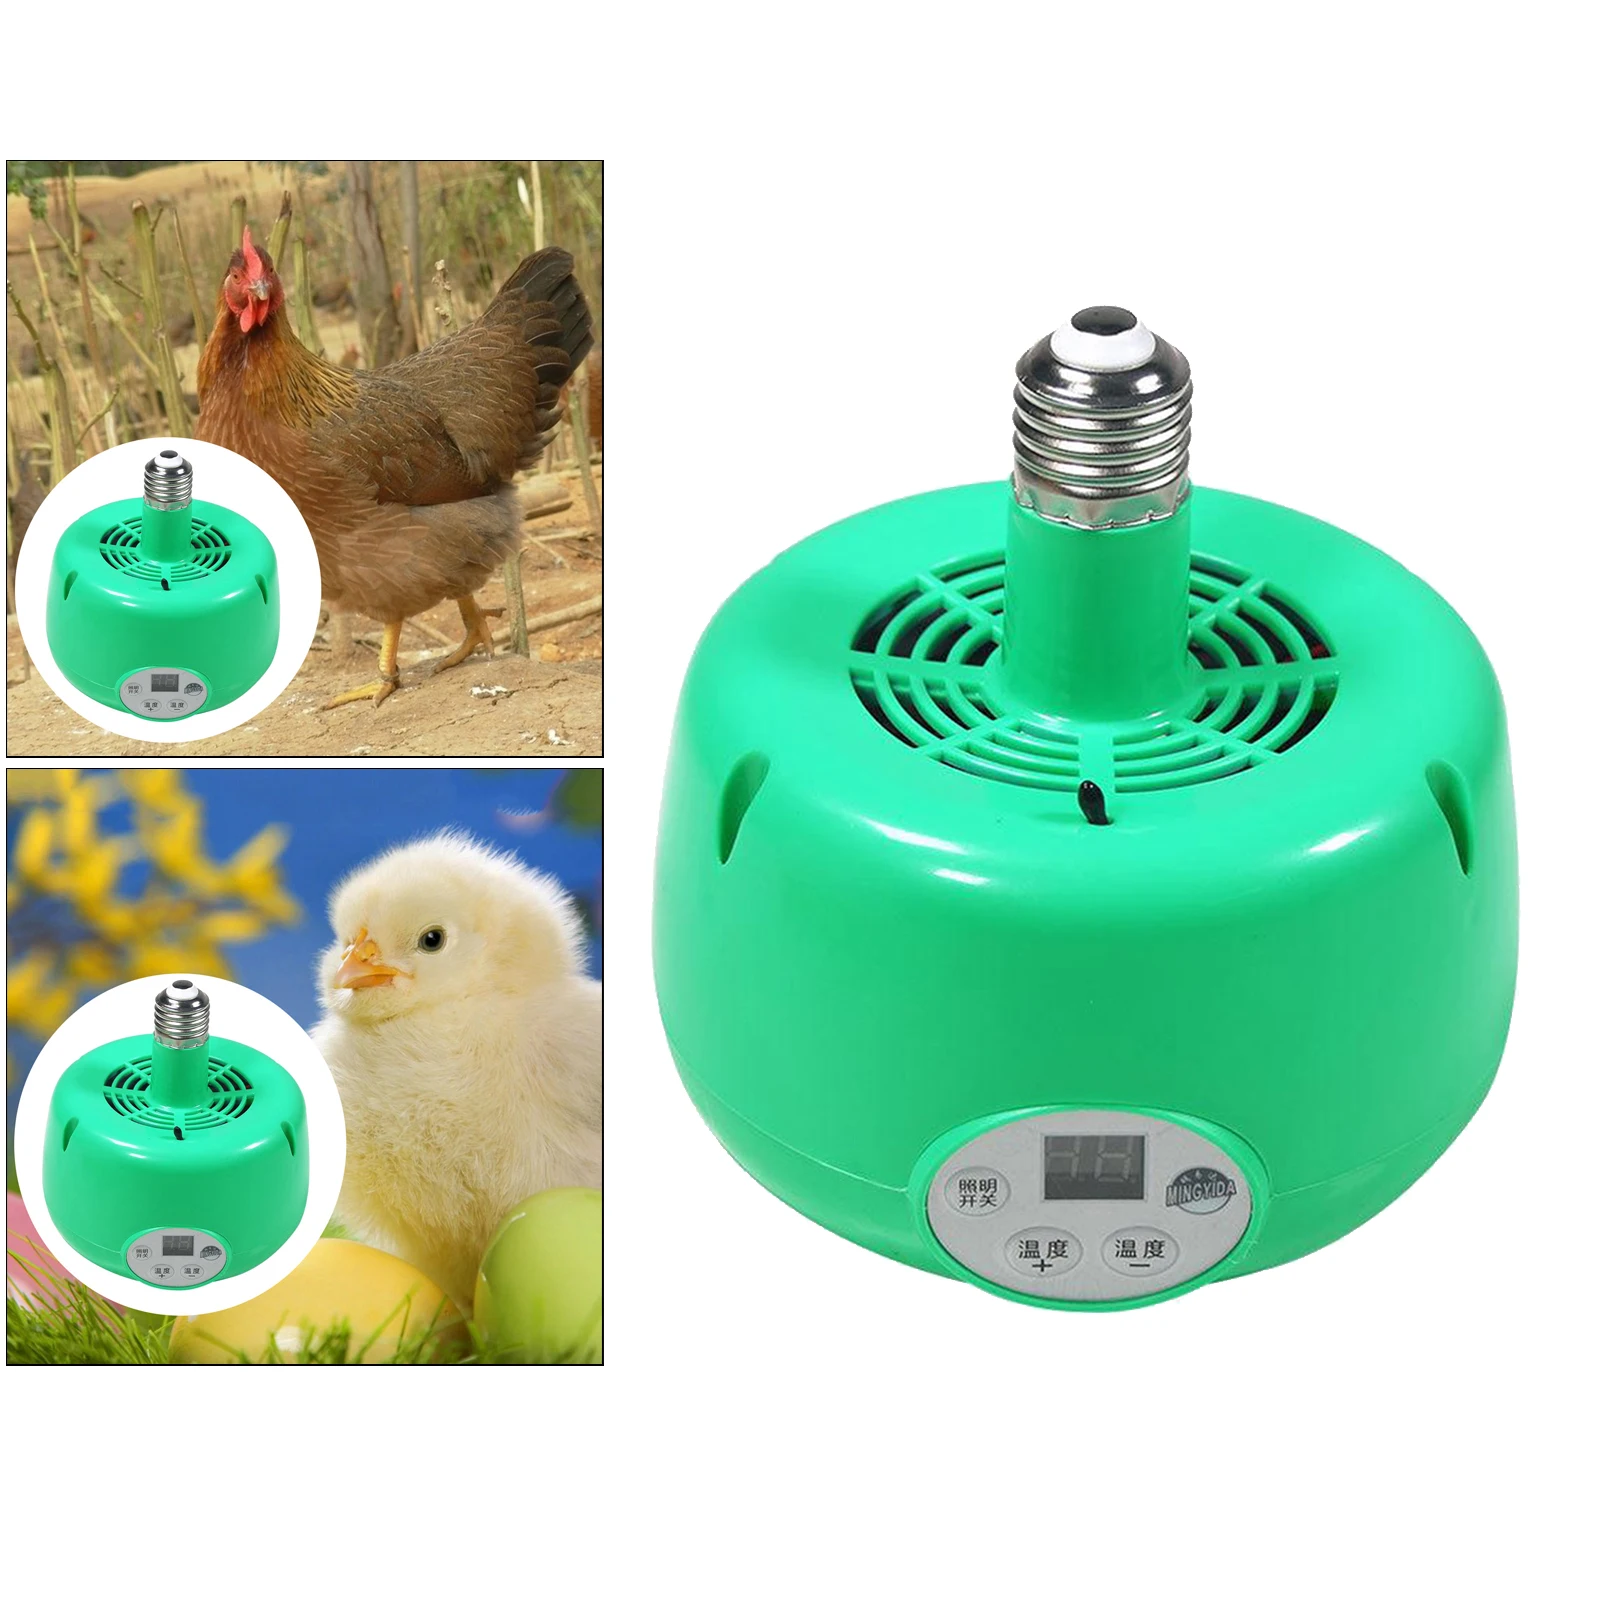 Fireproof Pet Heat Lamp, Livestock Heating Light Fan, Chicken Coop Heater, Poultry LED Lamp for Brooders, Chickens,Ducks, Pet